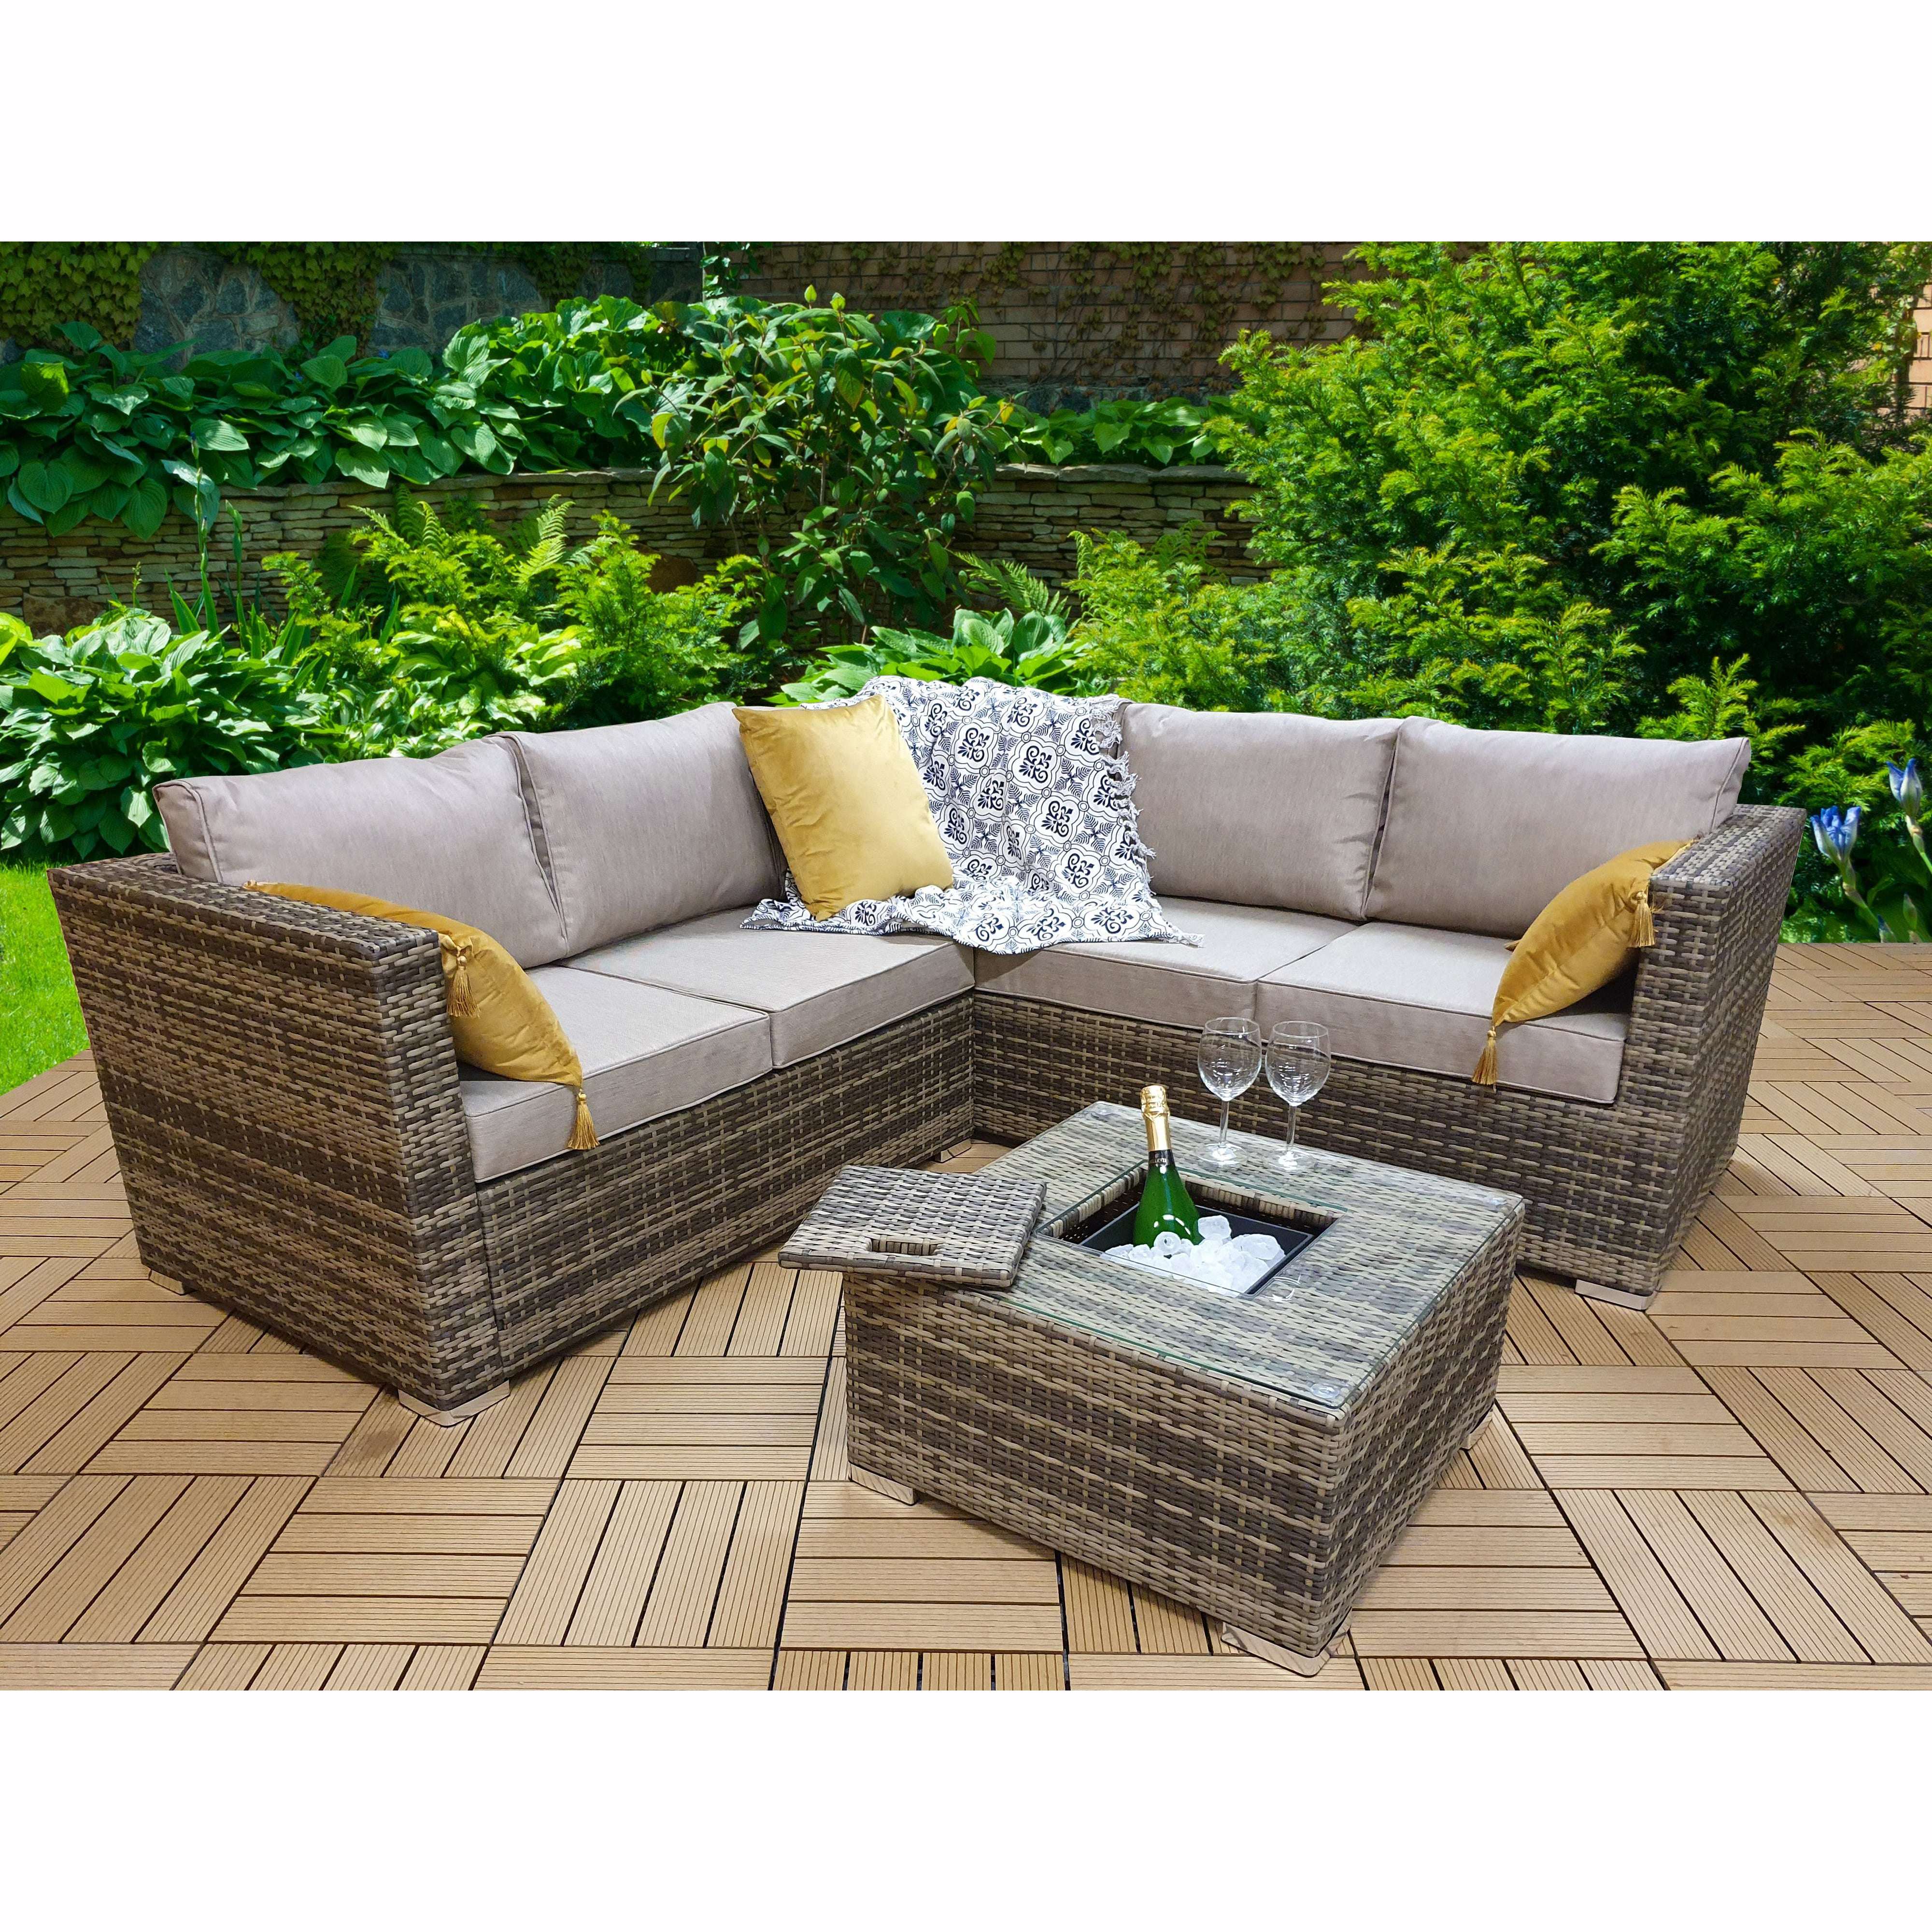 Exceptional Garden:Signature Weave Georgia Sofa Set with Ice Bucket - Mixed Brown